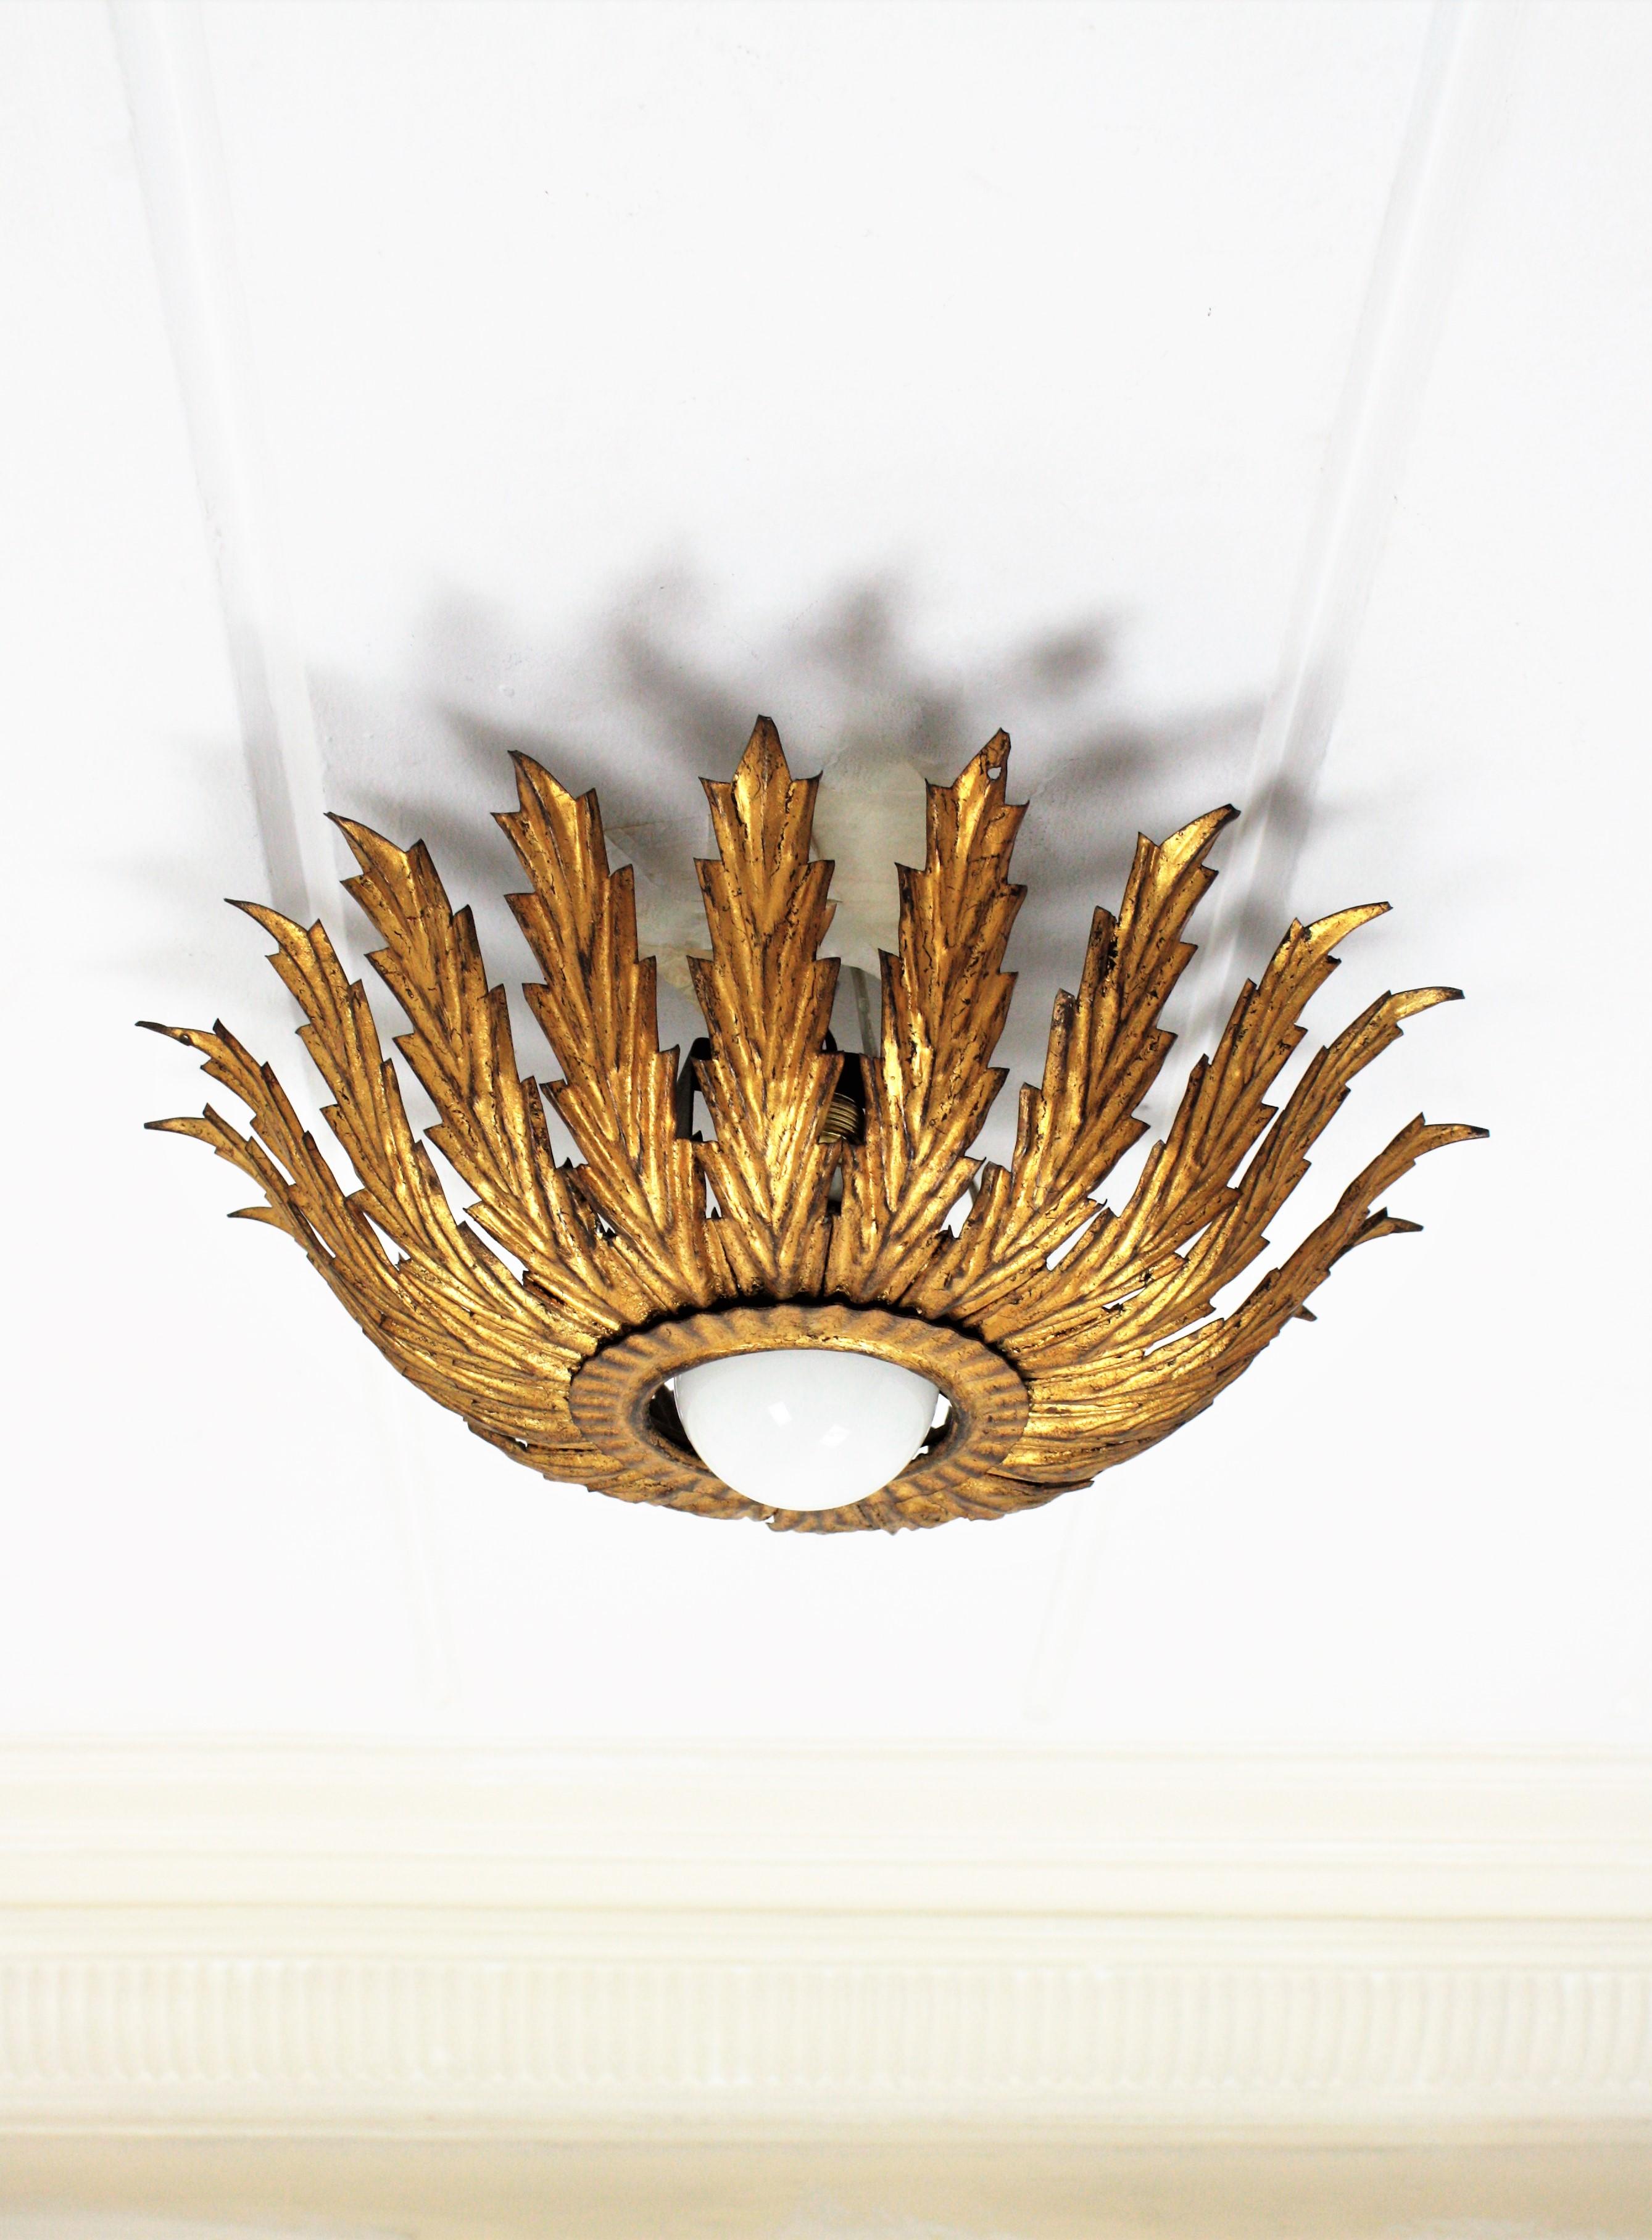 French Sunburst Light Fixture with Scalloped Leaves, Gilt Iron,  1950s For Sale 5